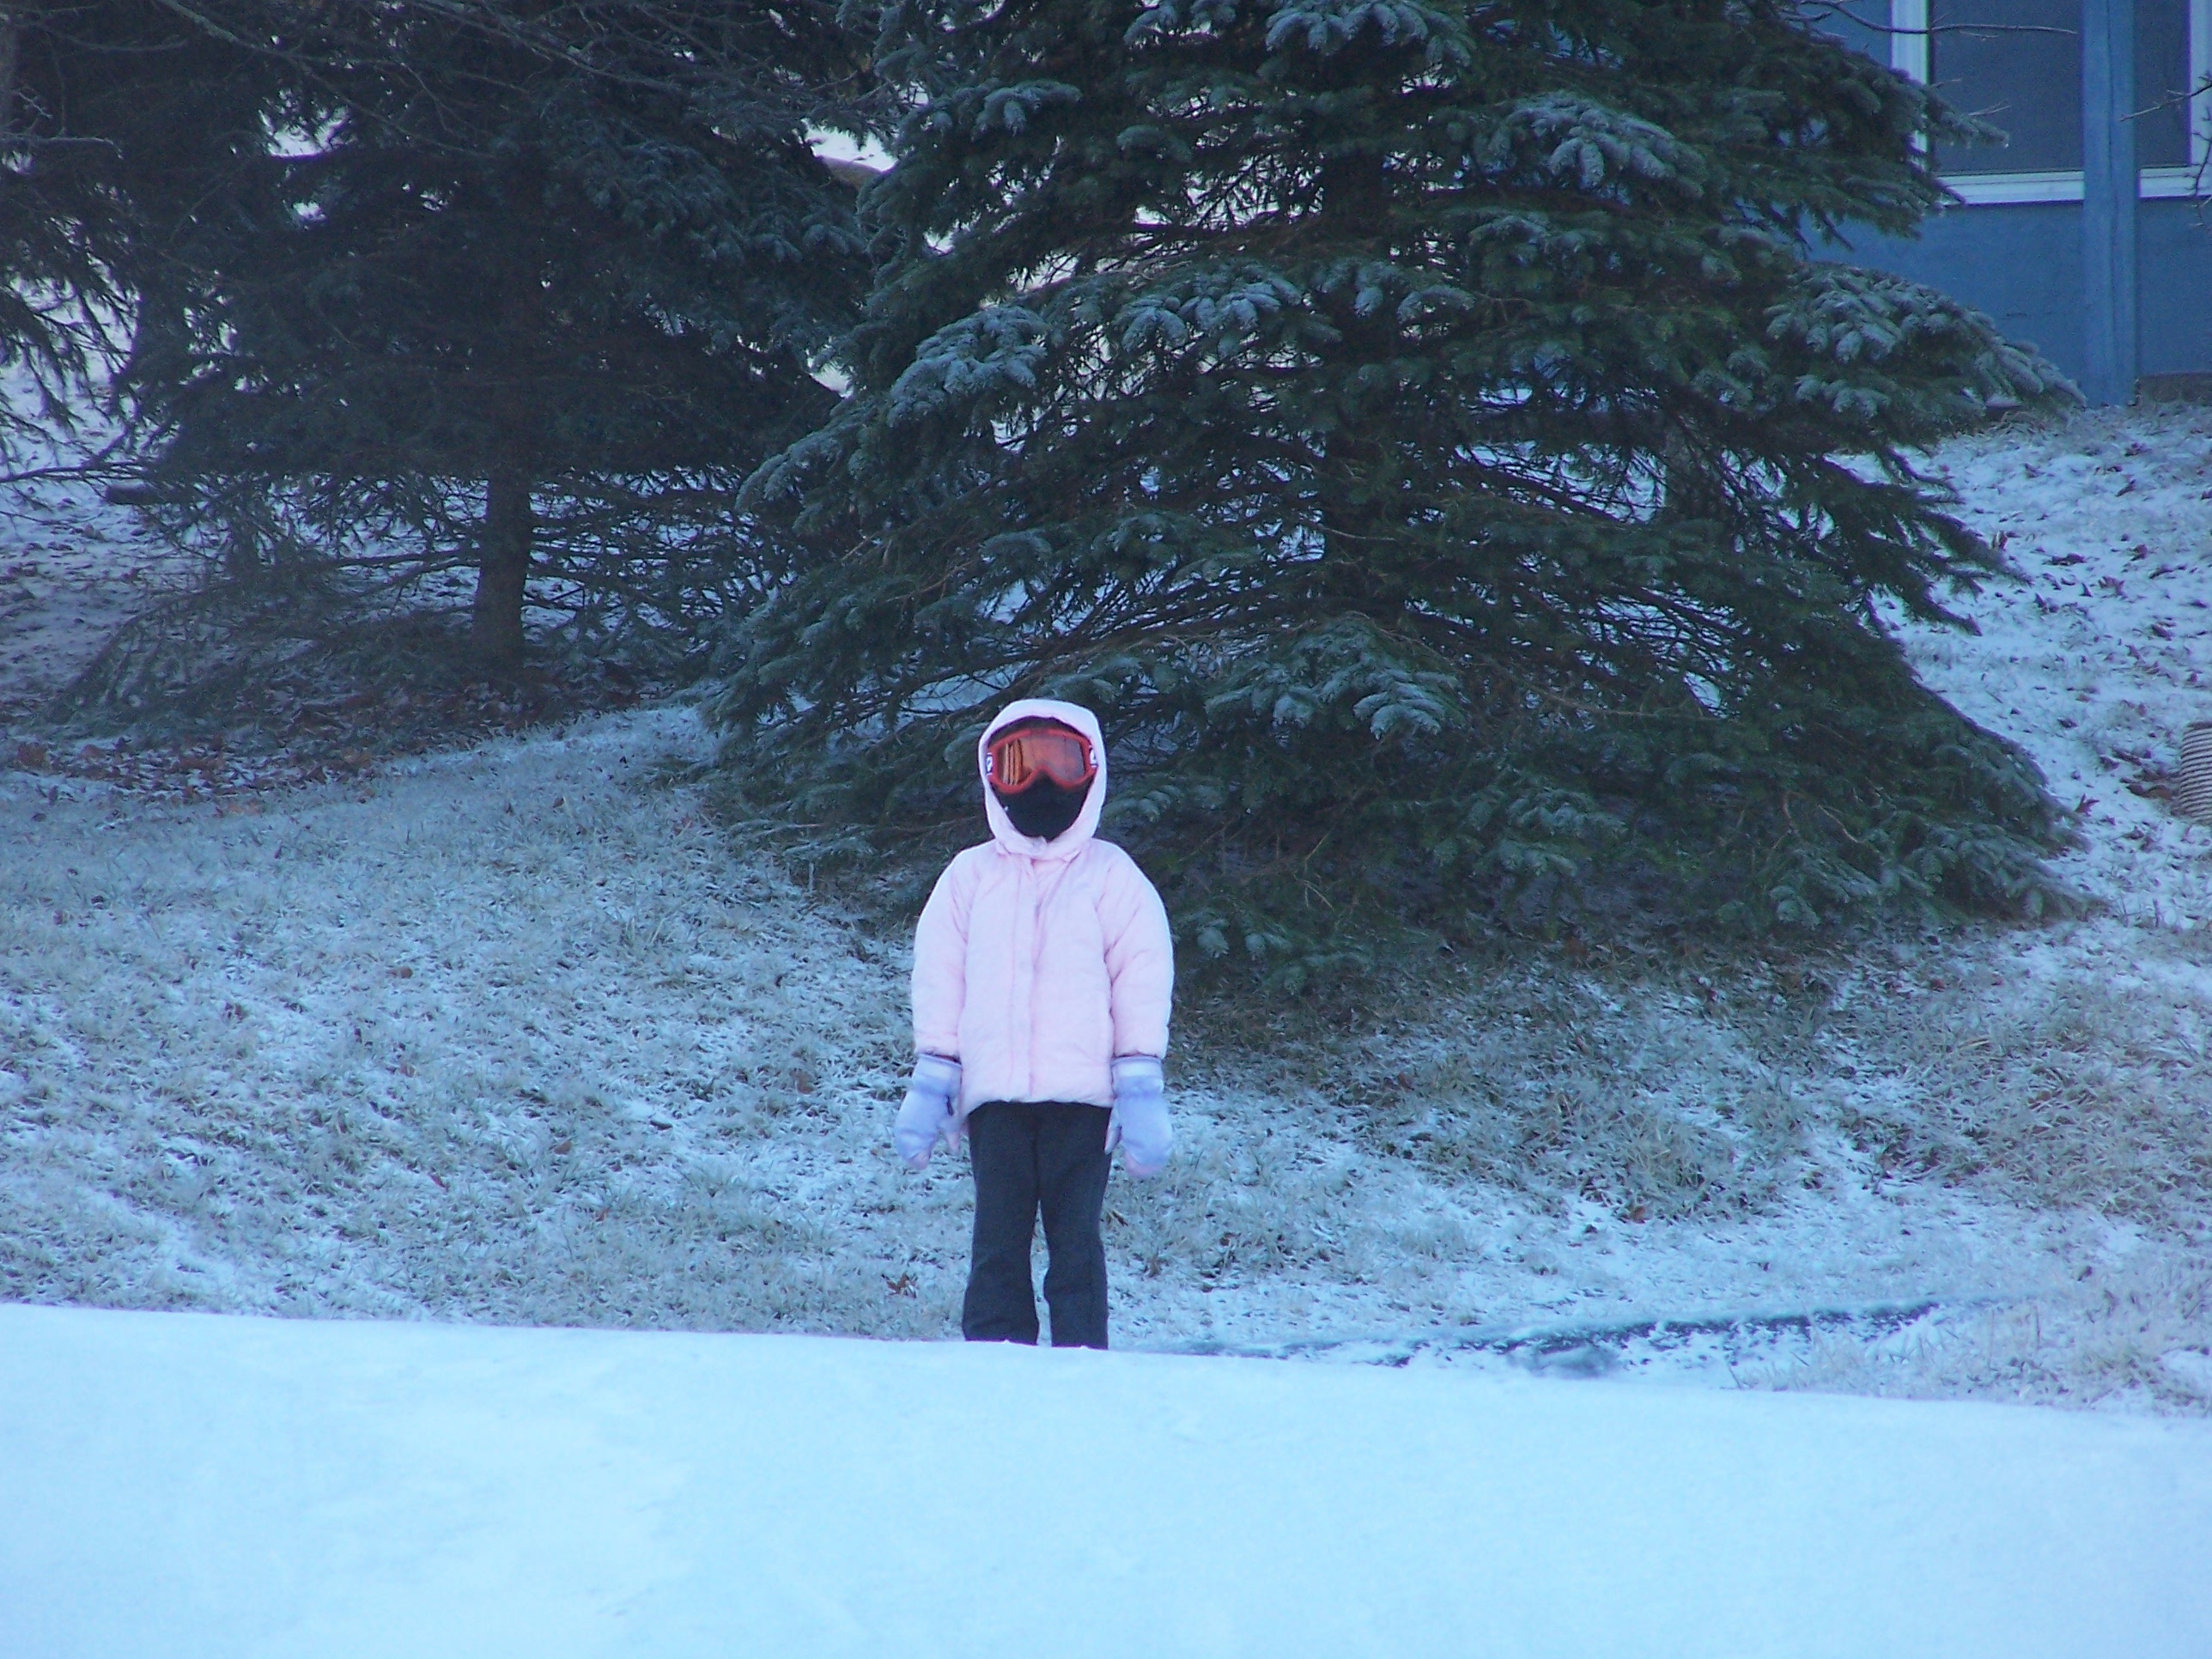 Zoom Shot Of Zoee' At The Top Of The Sledding Run With Her New Goggles And Face Mask...Brrrrrr, It Was COLD!